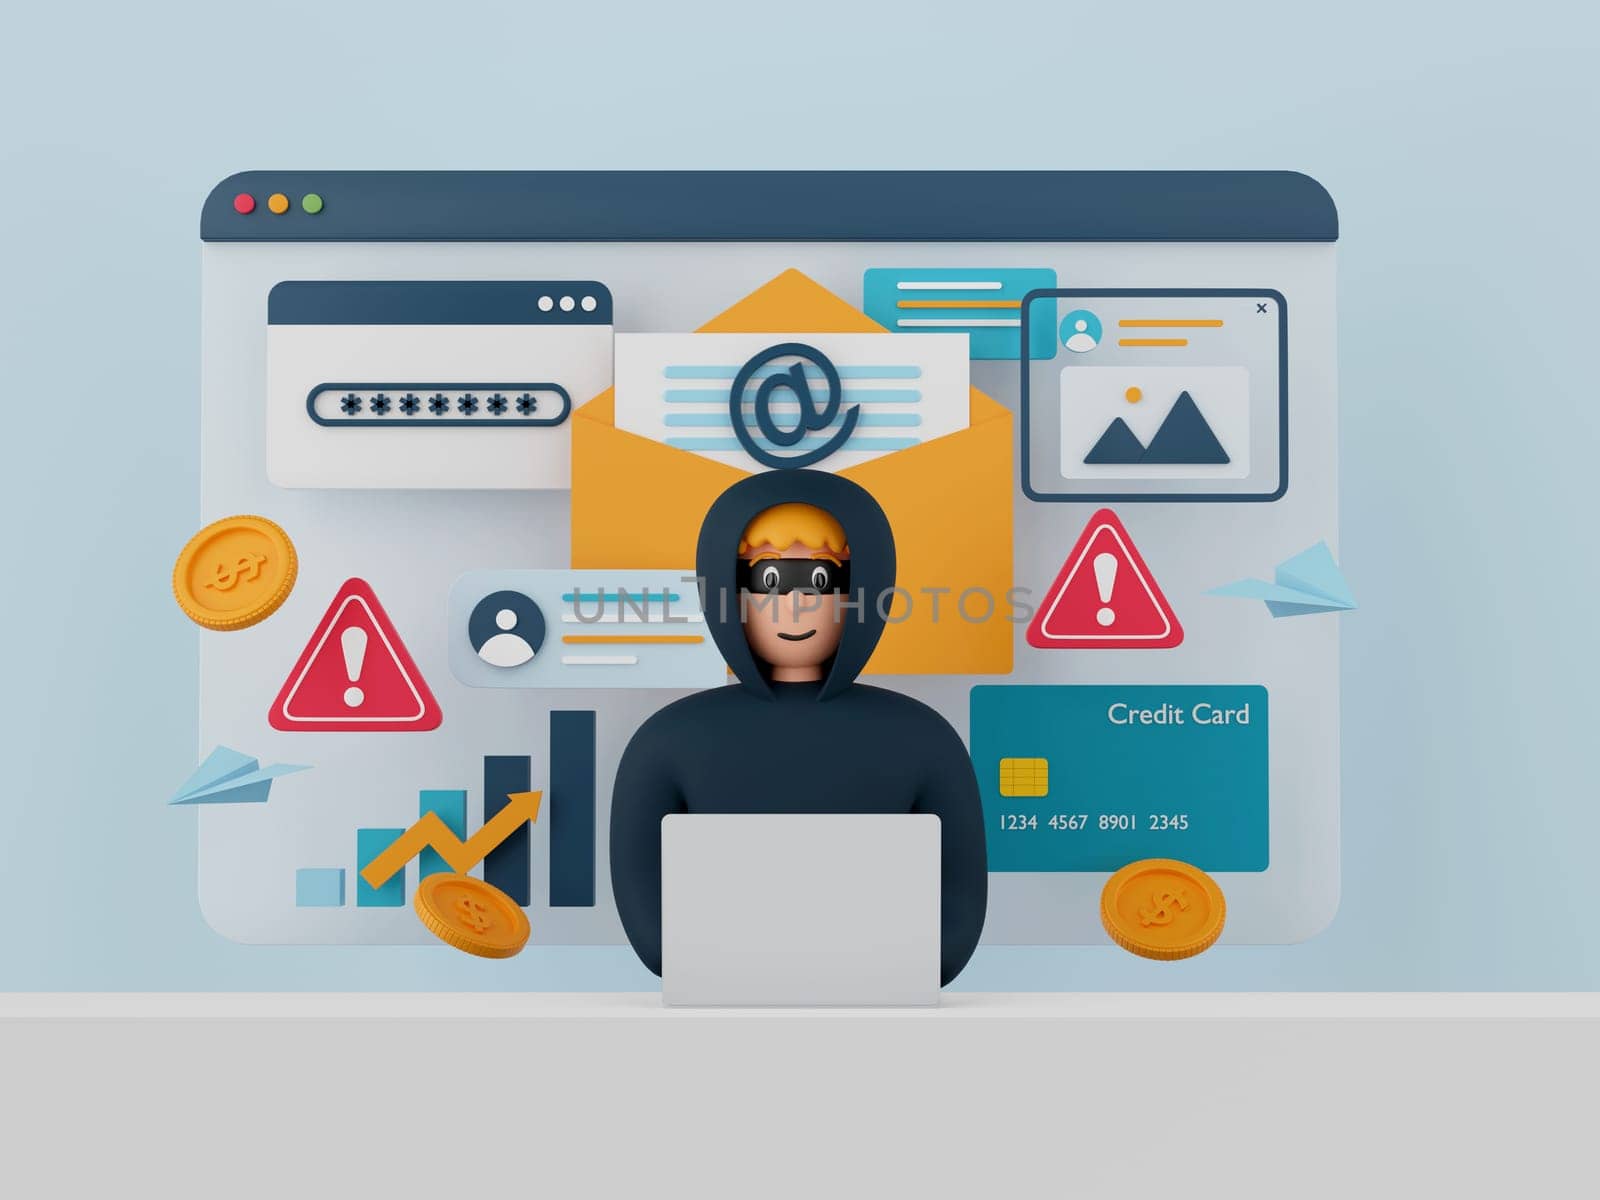 3d illustration of Data phishing concept, Hacker and Cyber criminals phishing stealing private personal data, password, email and credit card. Online scam, malware and password phishing. by nutzchotwarut